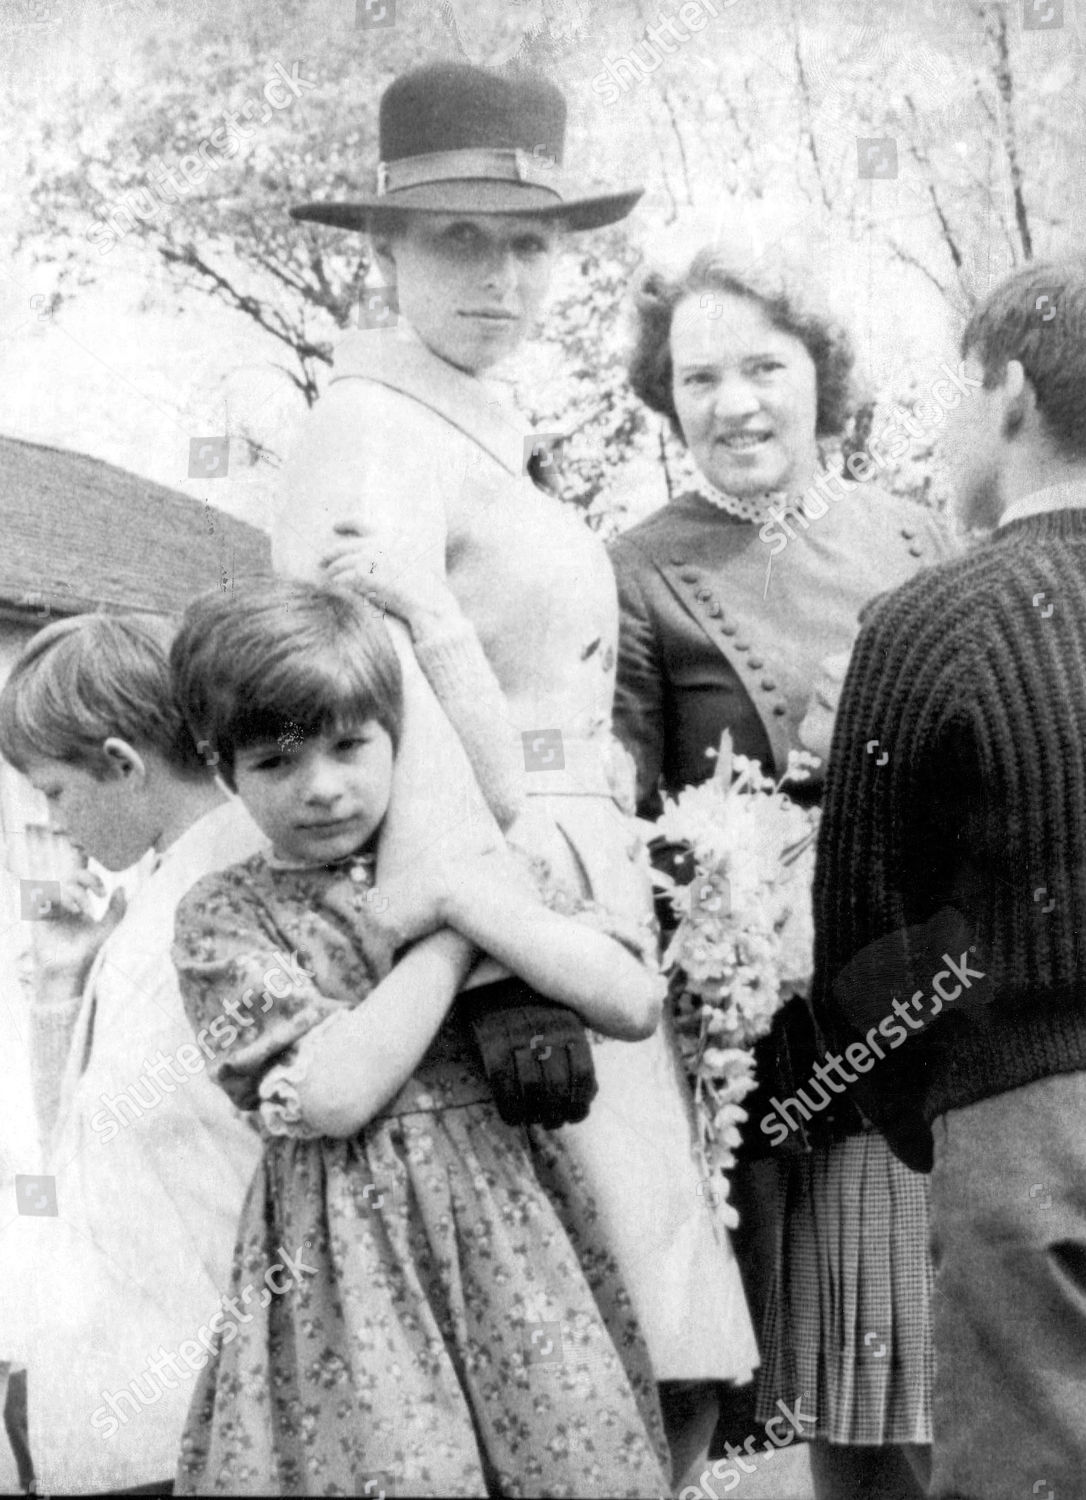 princess-anne-now-princess-royal-1969-picture-shows-princess-anne-visiting-a-home-run-by-the-royal-scottish-society-for-the-prevention-of-cruelty-to-children-in-polwarth-edinburgh-eight-year-old-carole-who-had-presented-a-posy-of-flowers-when-th-shutterstock-editorial-890813a.jpg